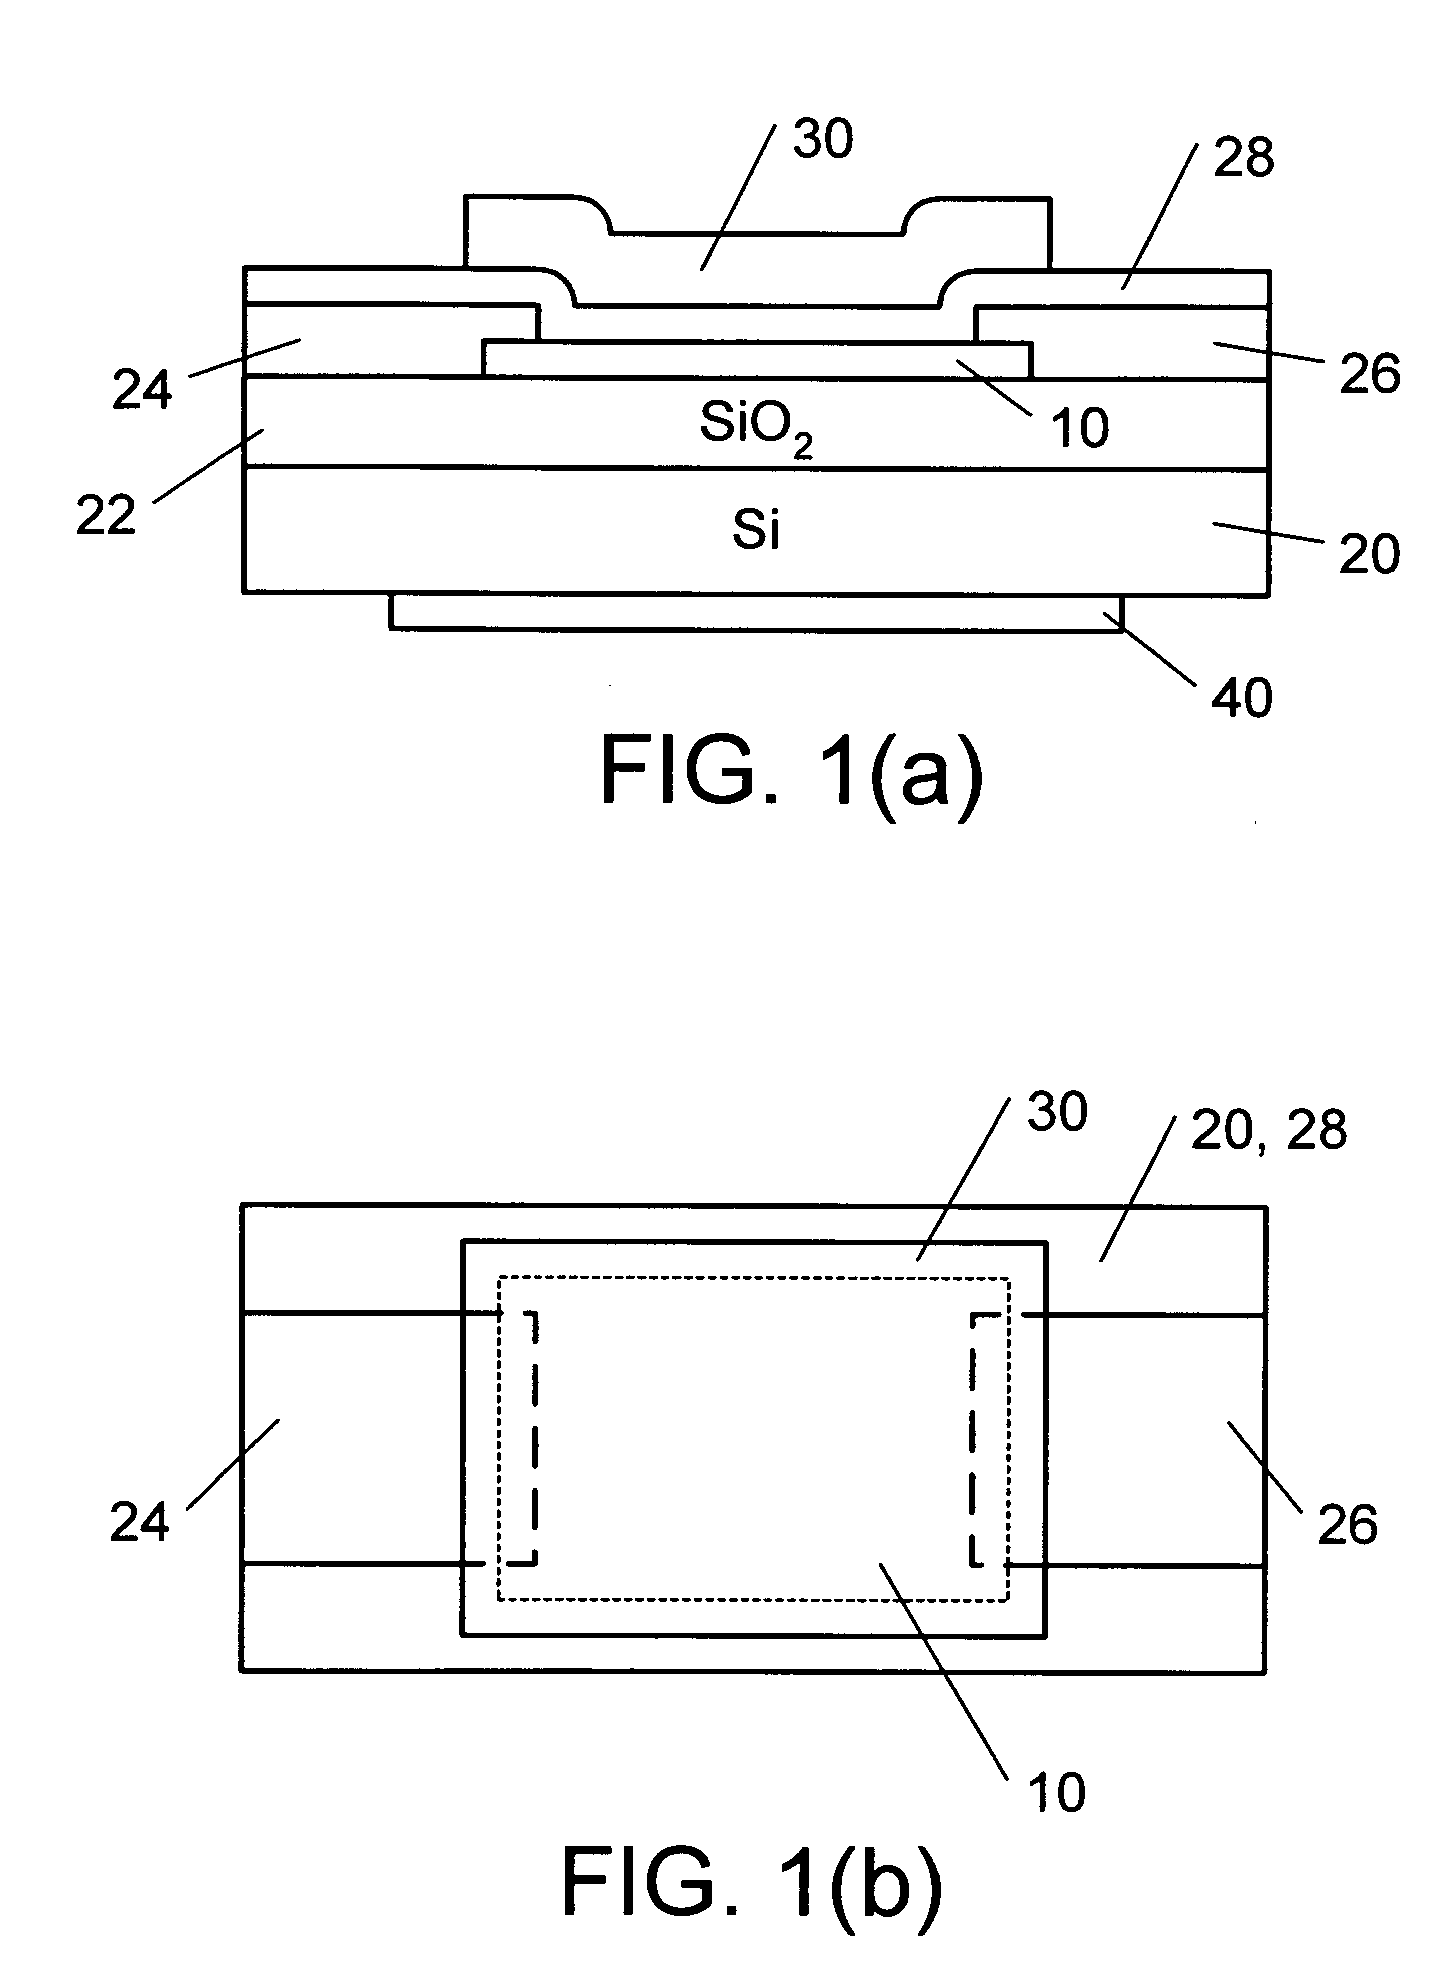 Fabrication method of electronic devices based on aligned high aspect ratio nanoparticle networks